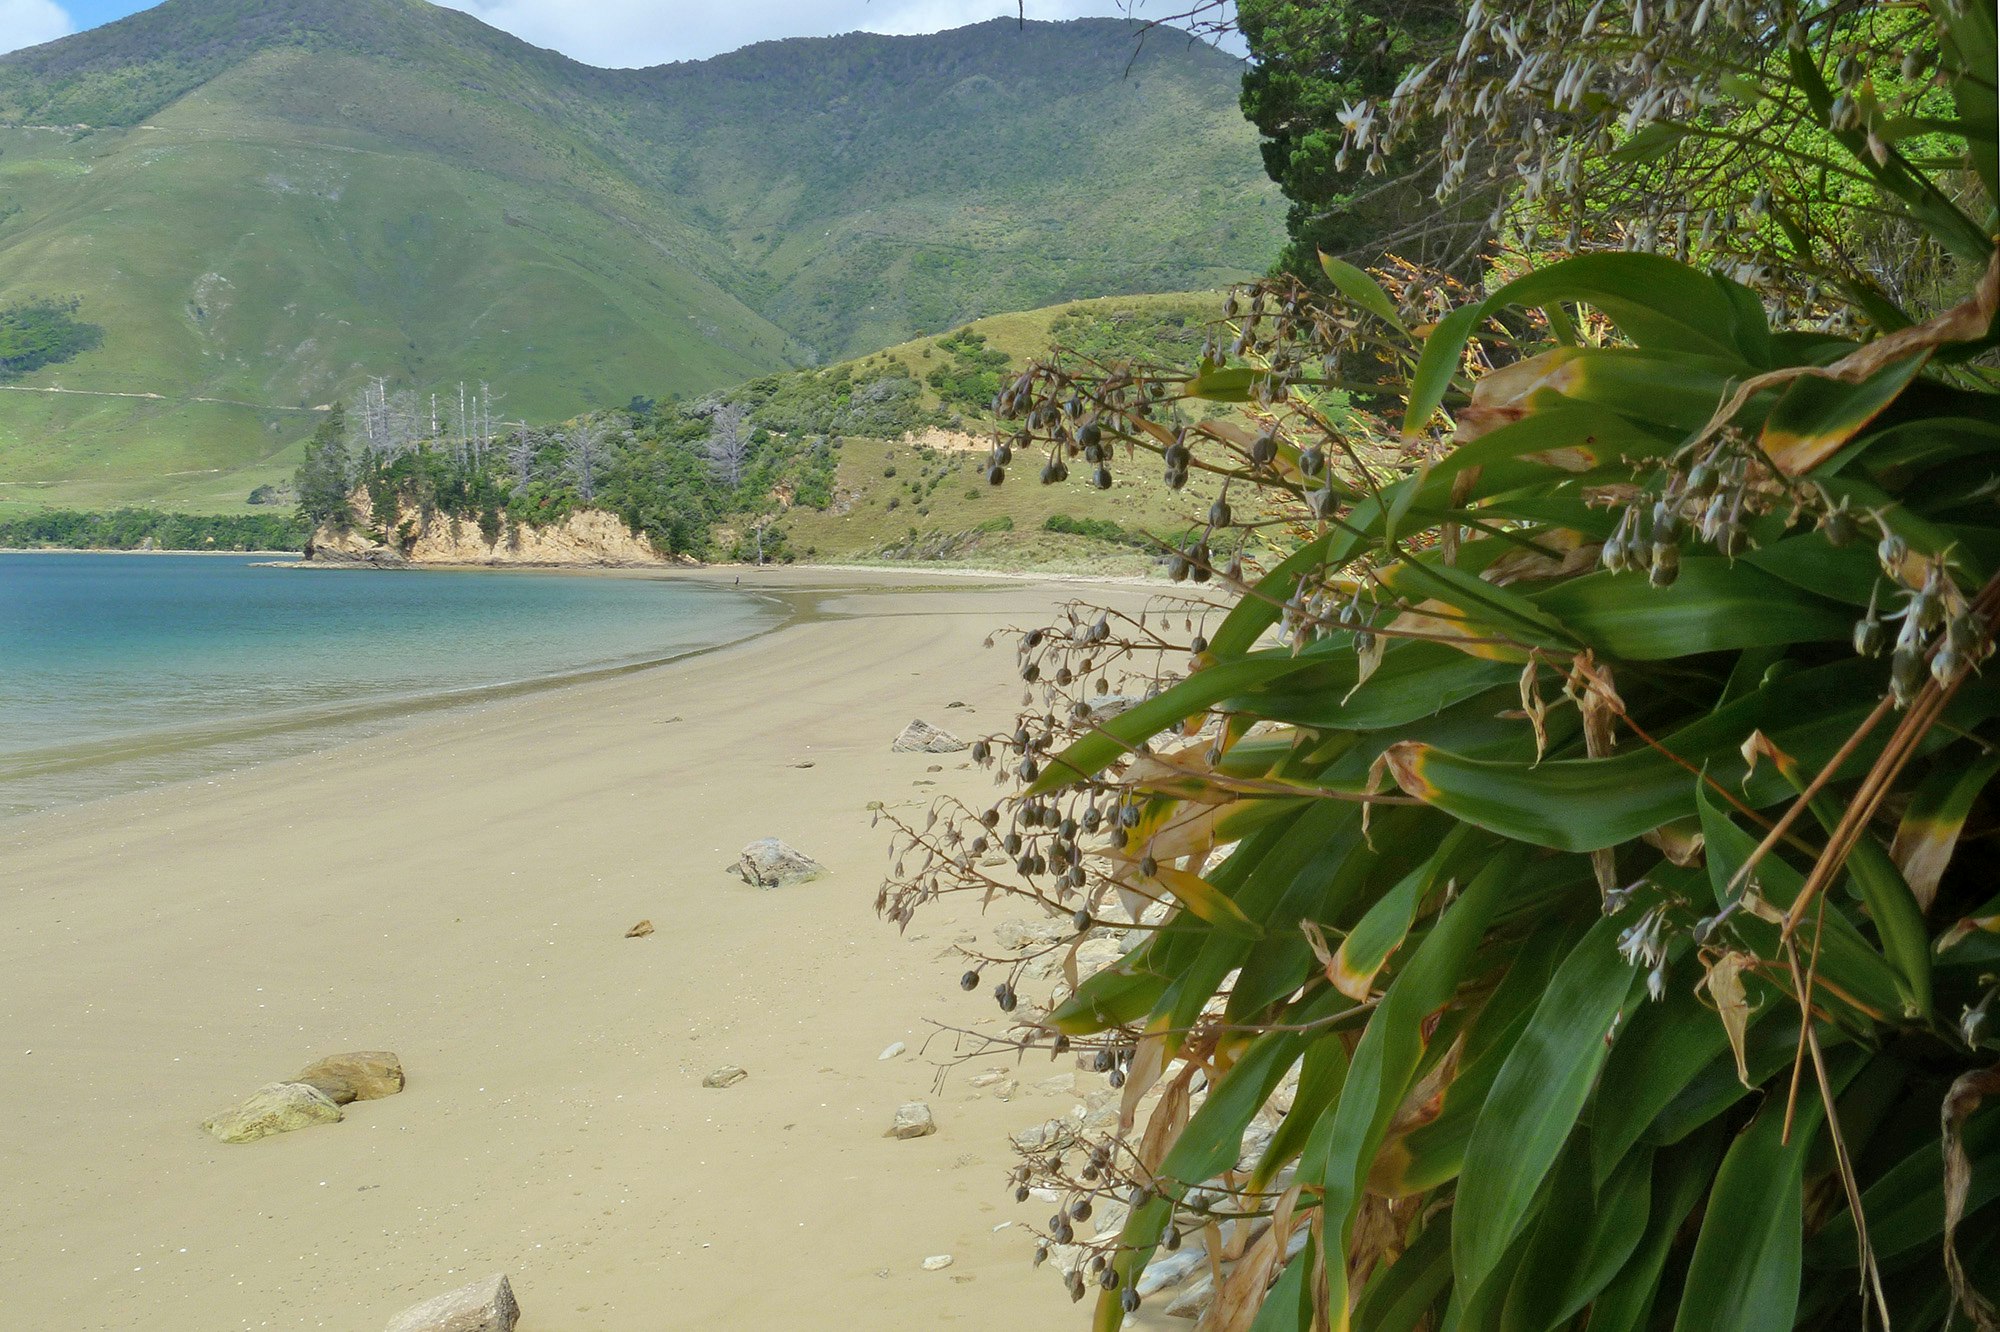 A beach with a flowering plant in the foreground